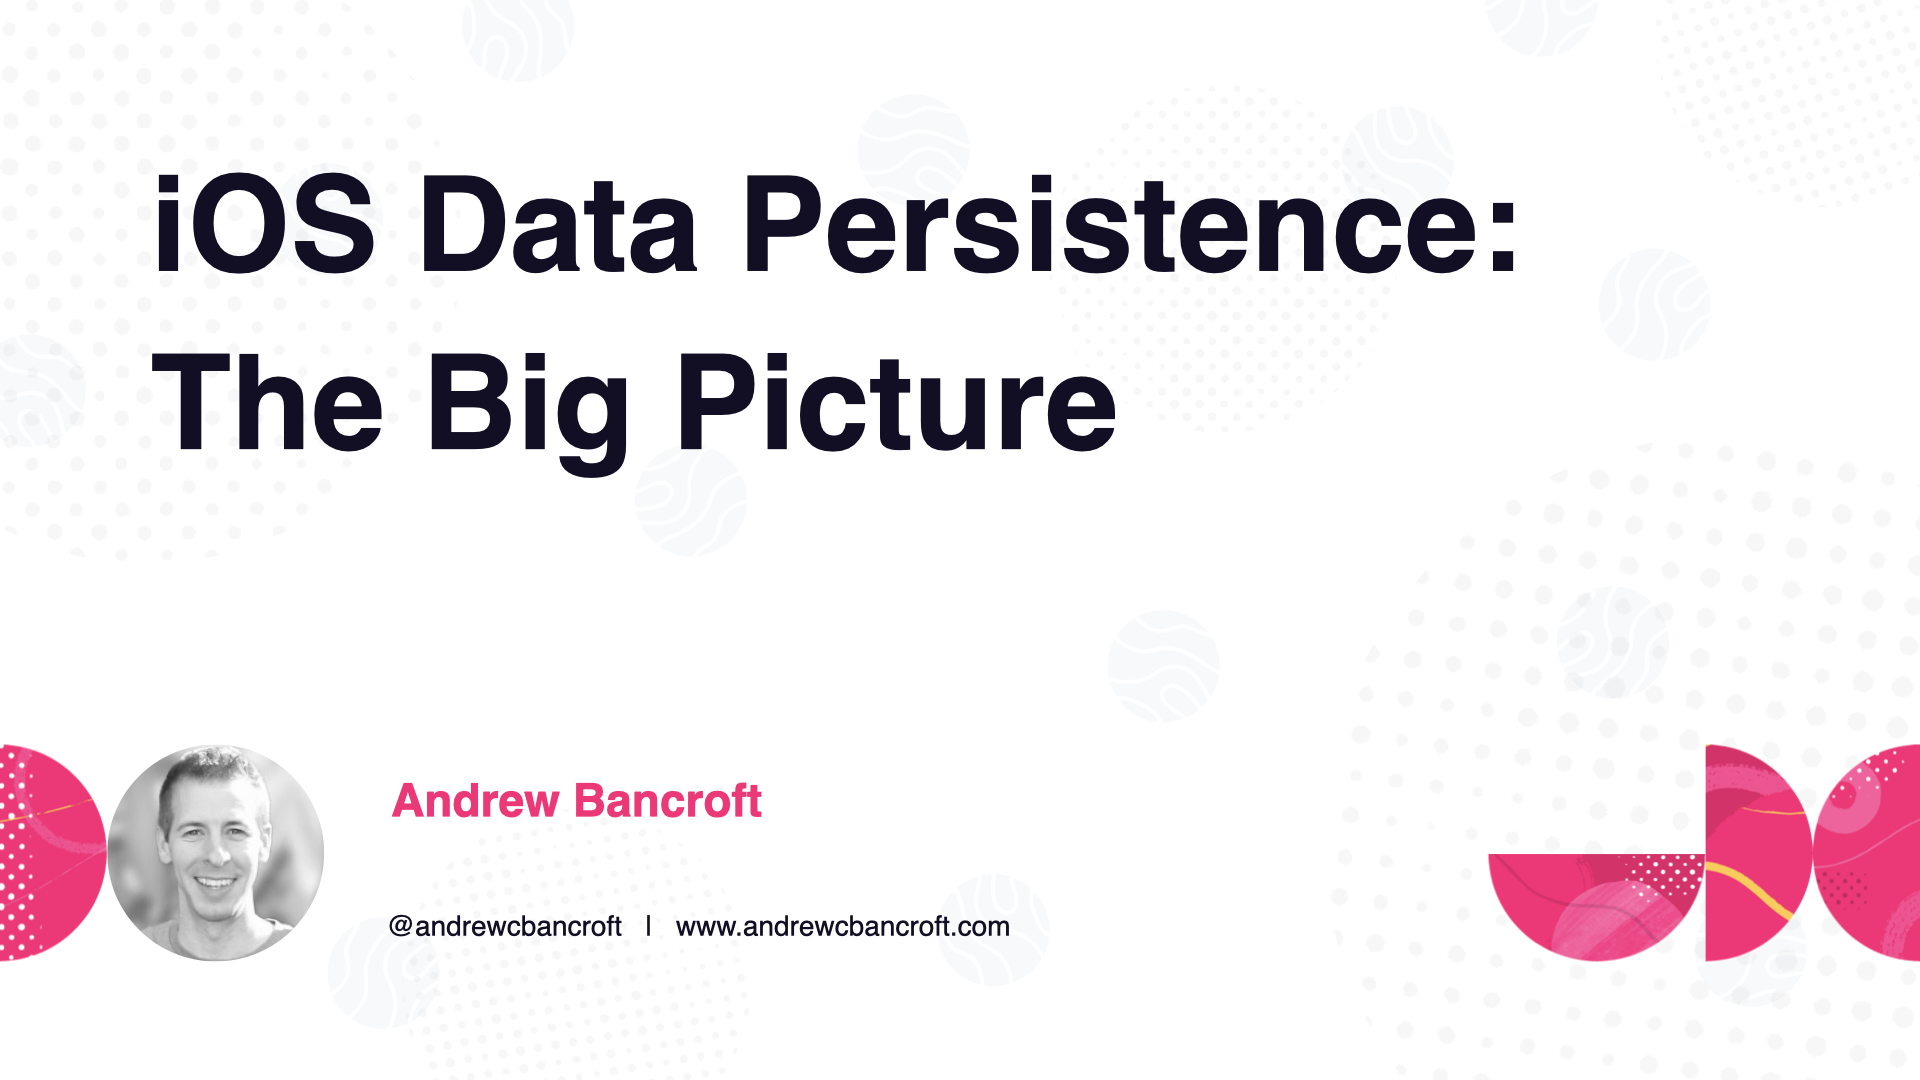 iOS Data Persistence: The Big Picture